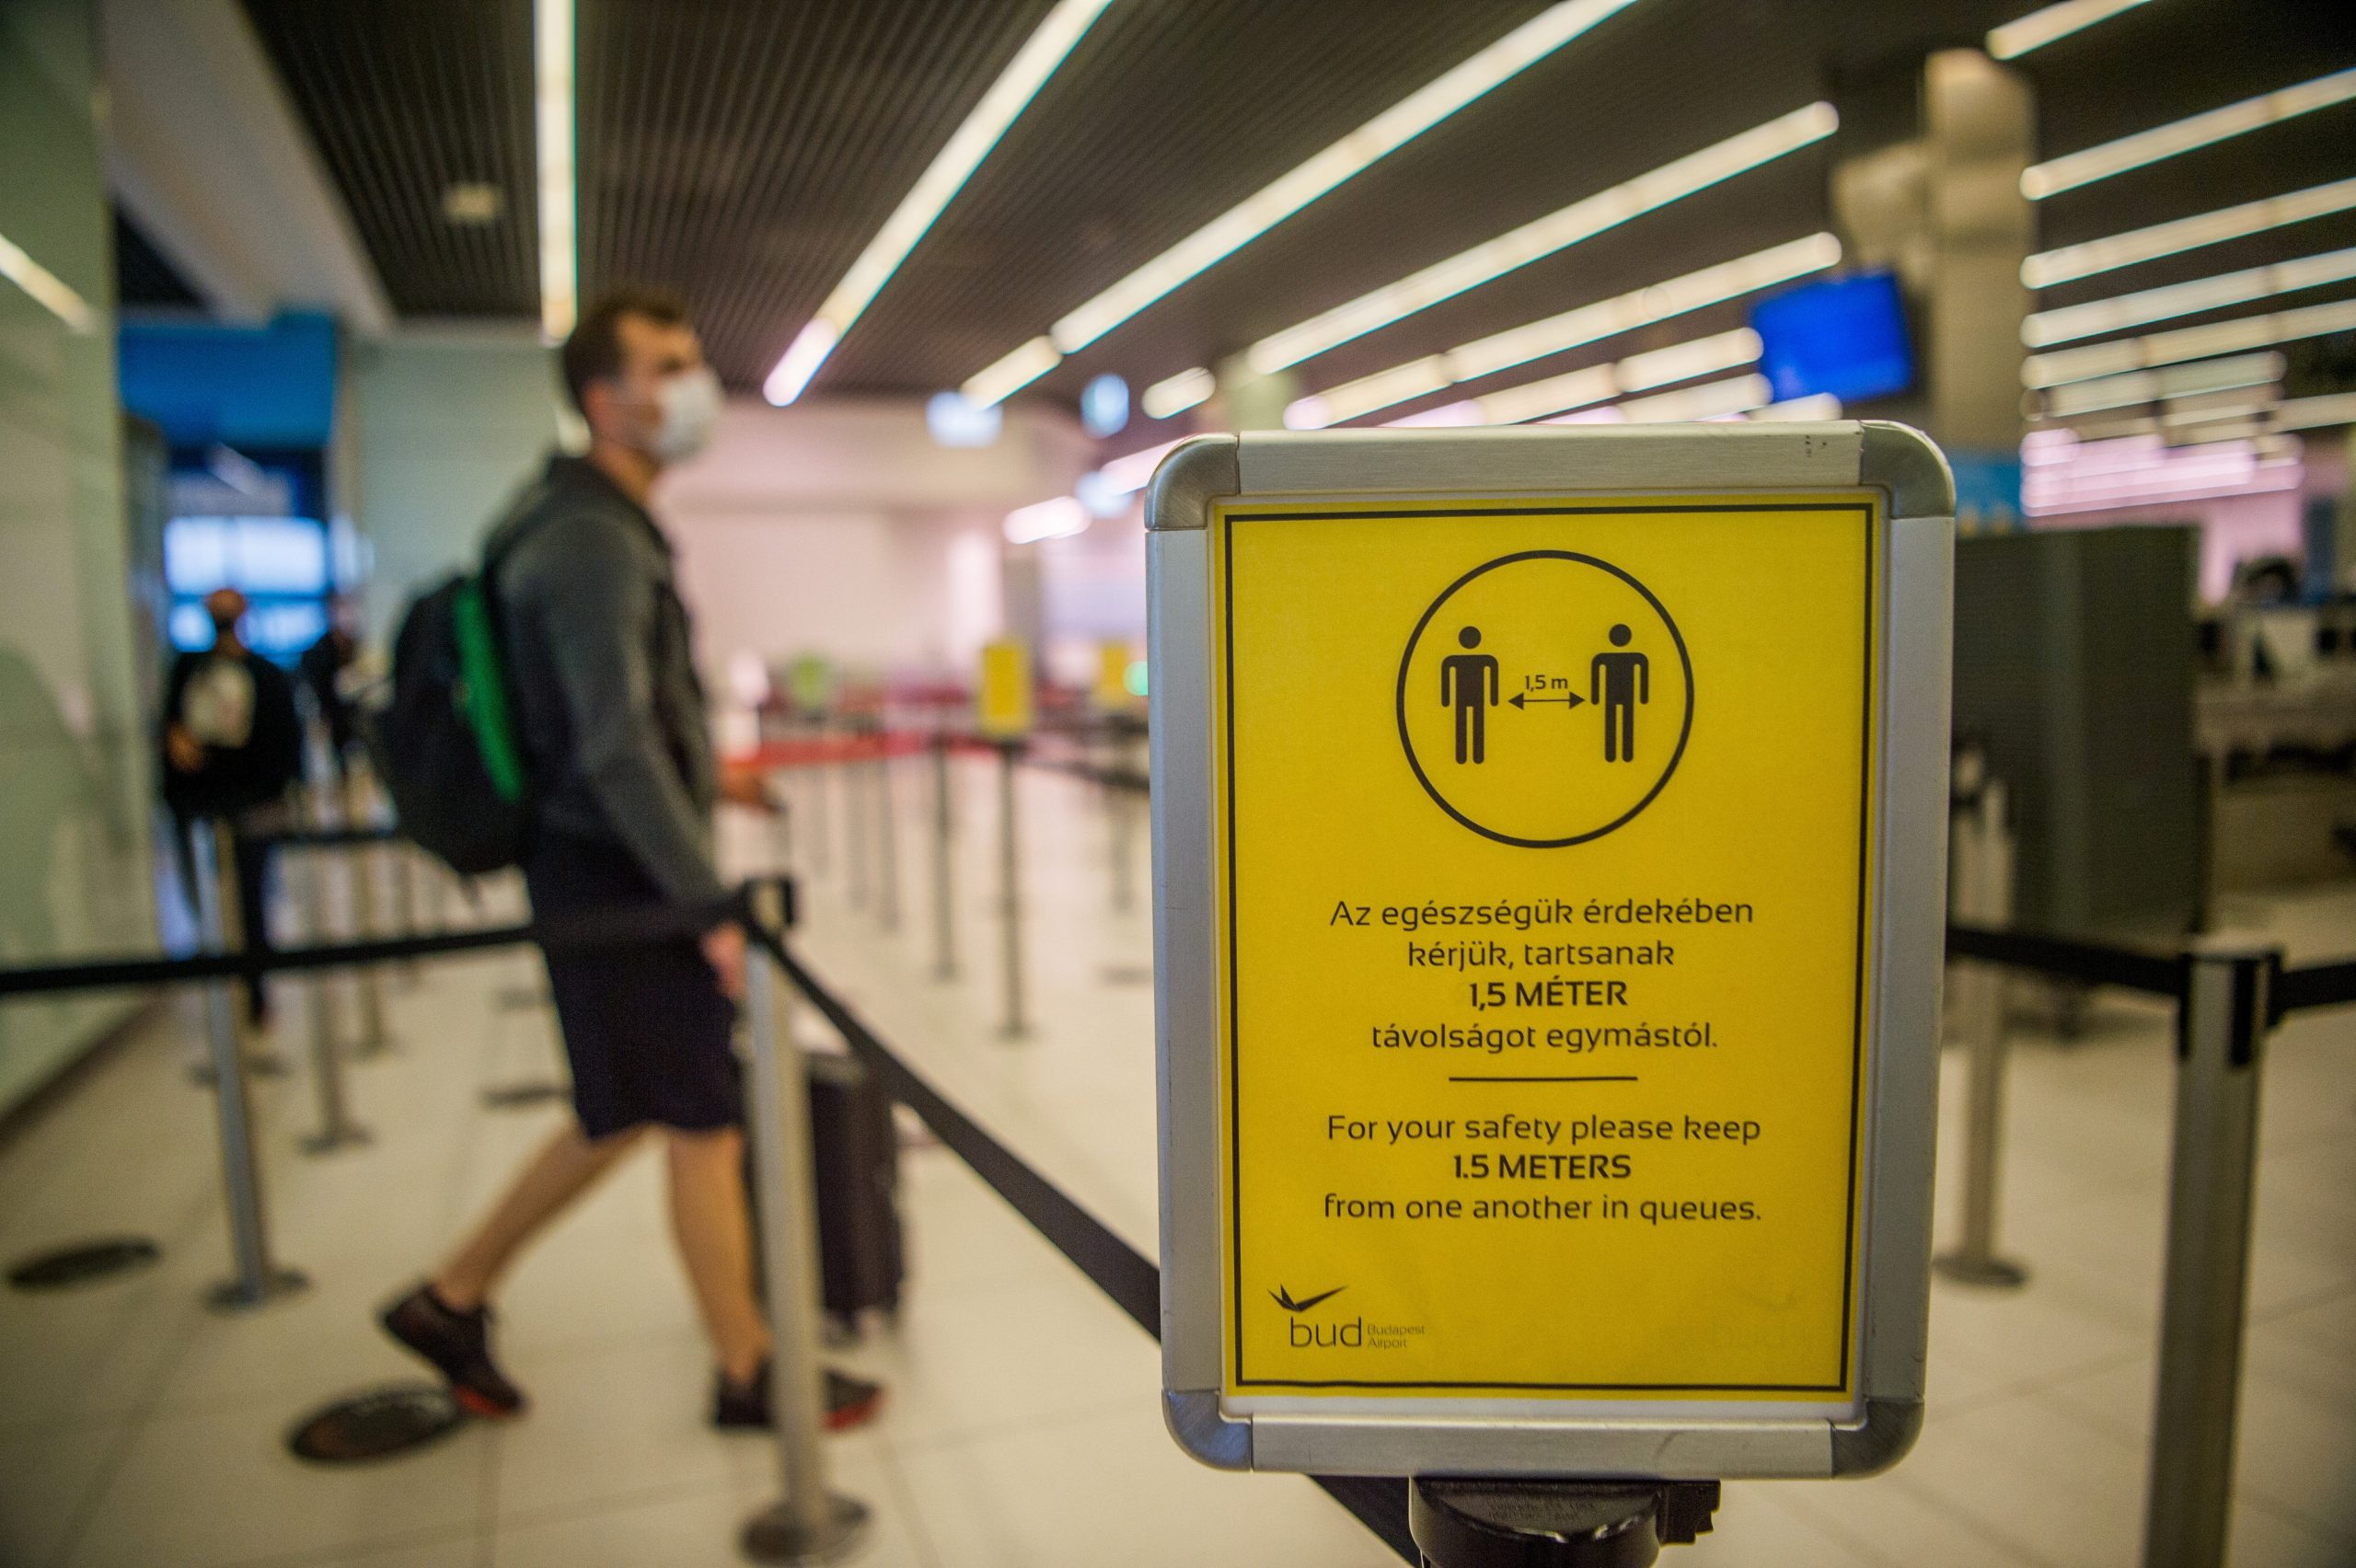 Budapest Airport Expects Passenger Numbers to Fall to 3,000 Daily